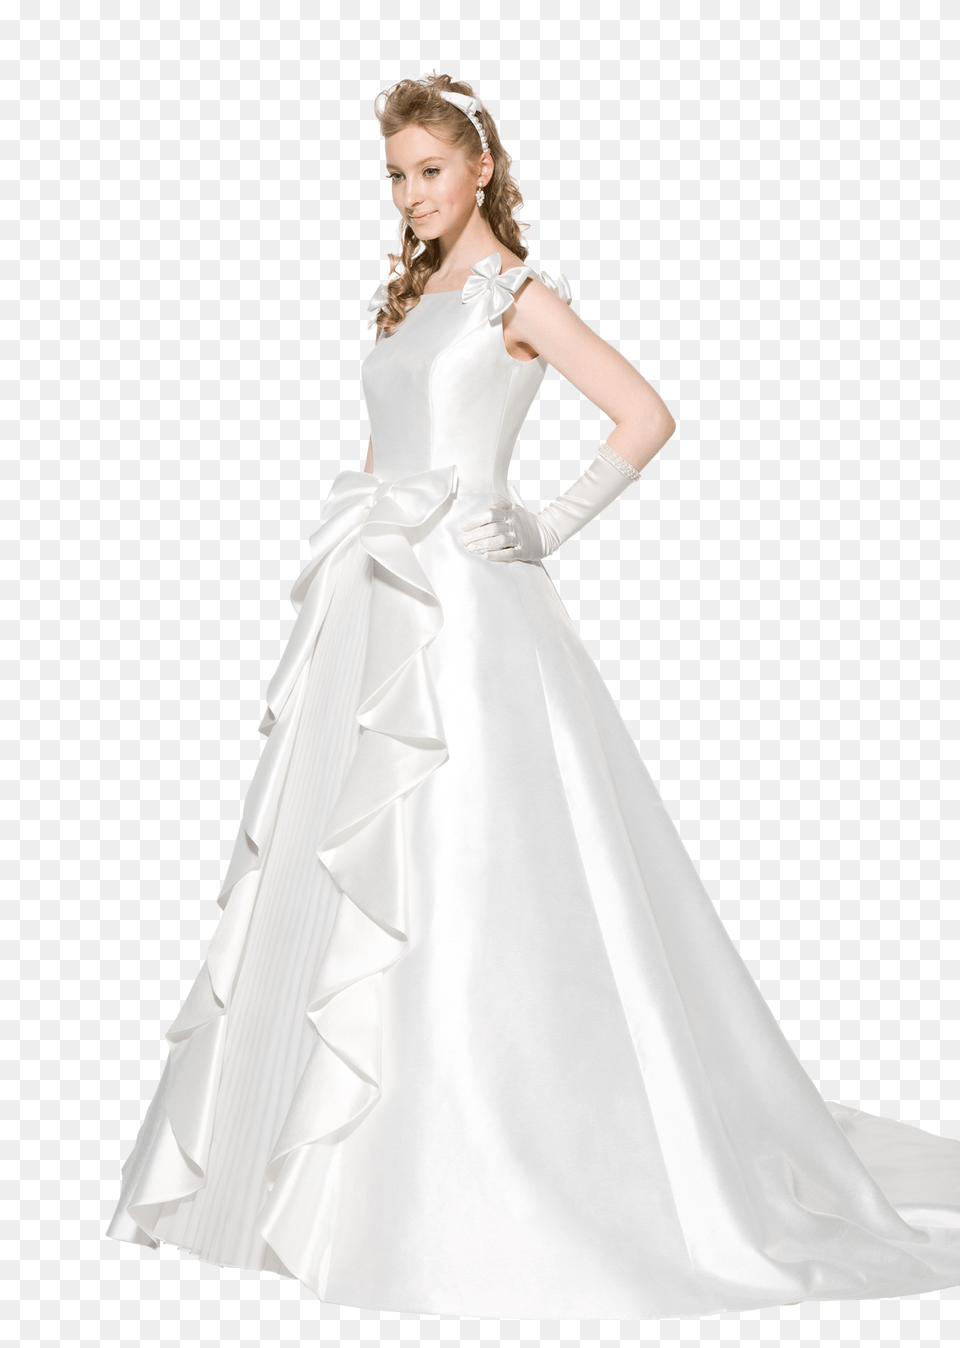 Bride, Formal Wear, Wedding Gown, Clothing, Dress Png